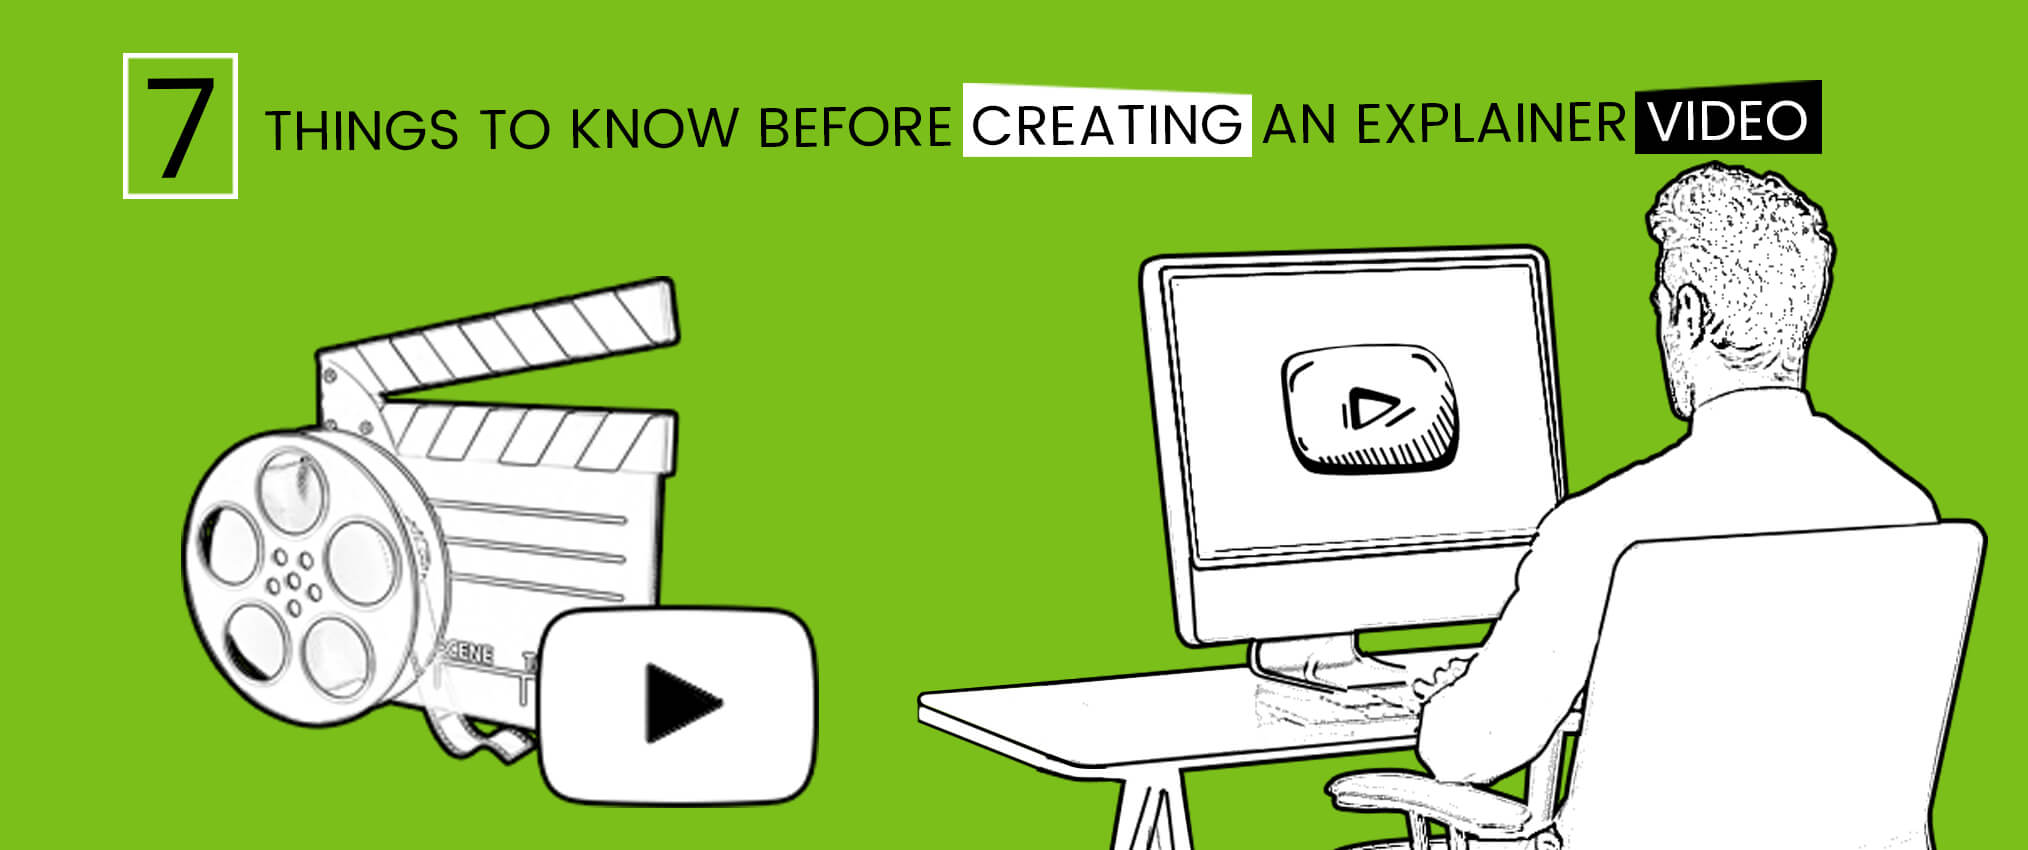 7 Things to Know Before Creating an Explainer Video